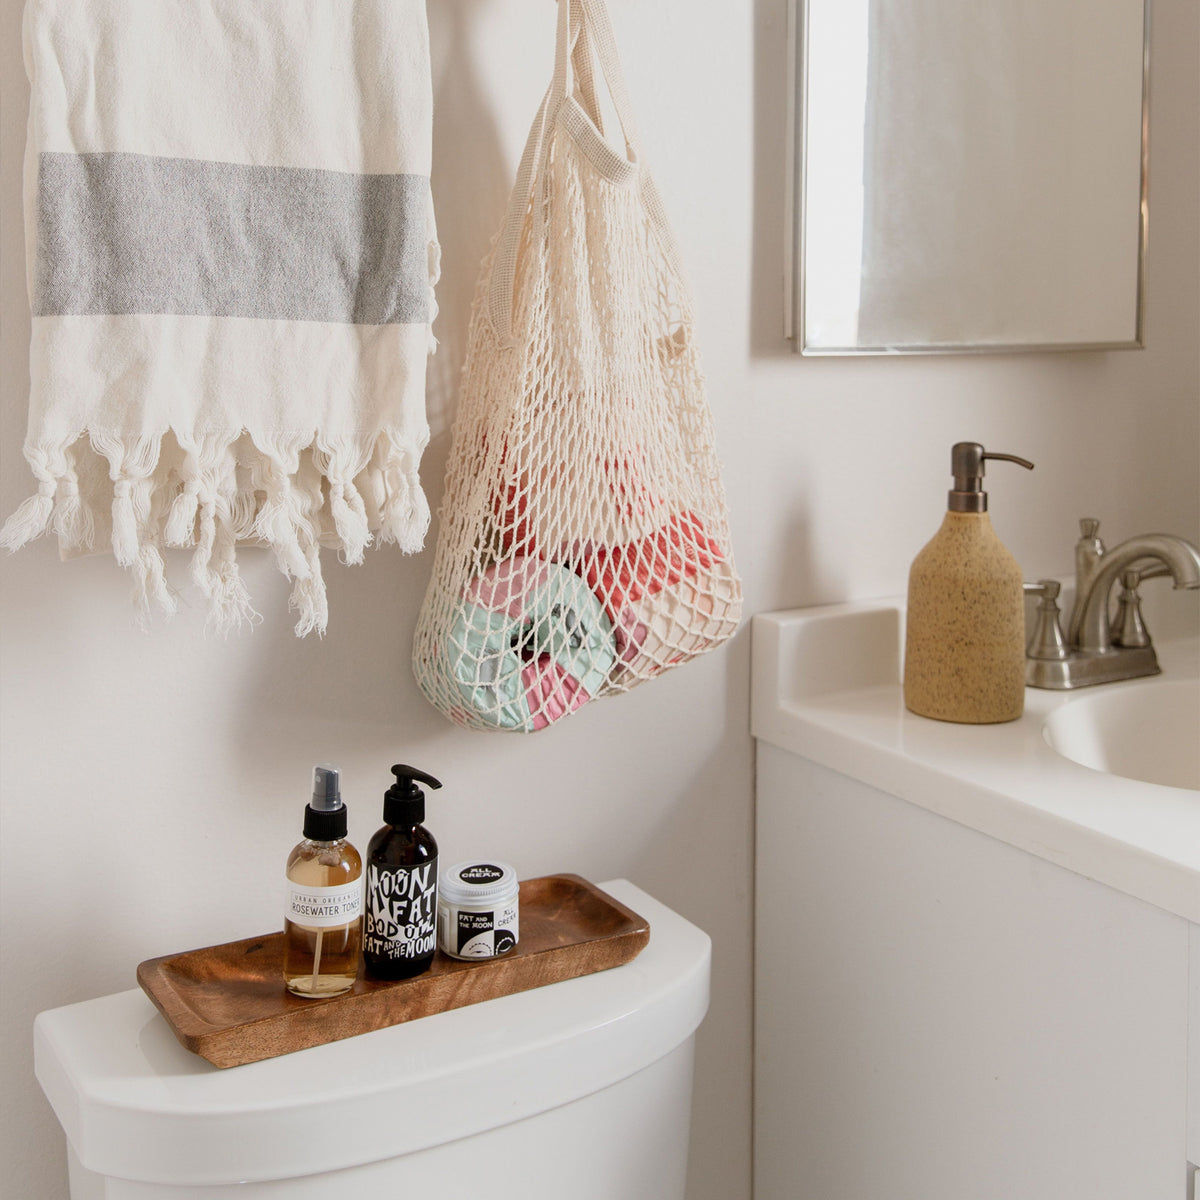 A white bathroom interior with a tasseled towel and netted bag holding toilet paper hanging on the wall, a wooden tray of skin care products placed on top of the toilet, and to the right a ceramic soap dispenser next to a sink